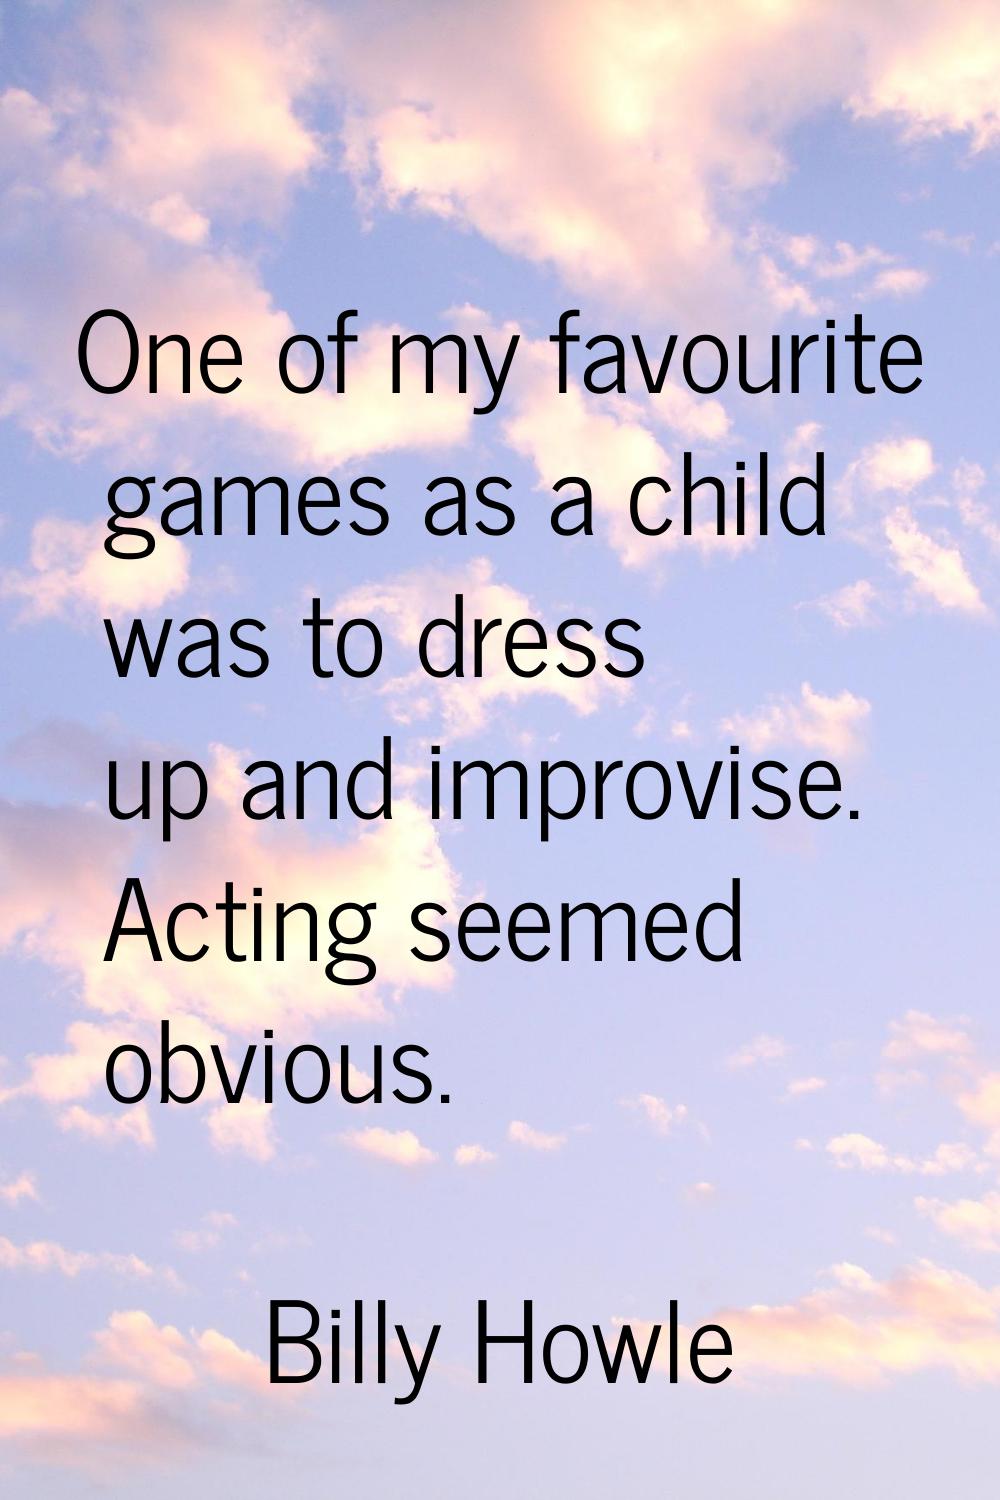 One of my favourite games as a child was to dress up and improvise. Acting seemed obvious.